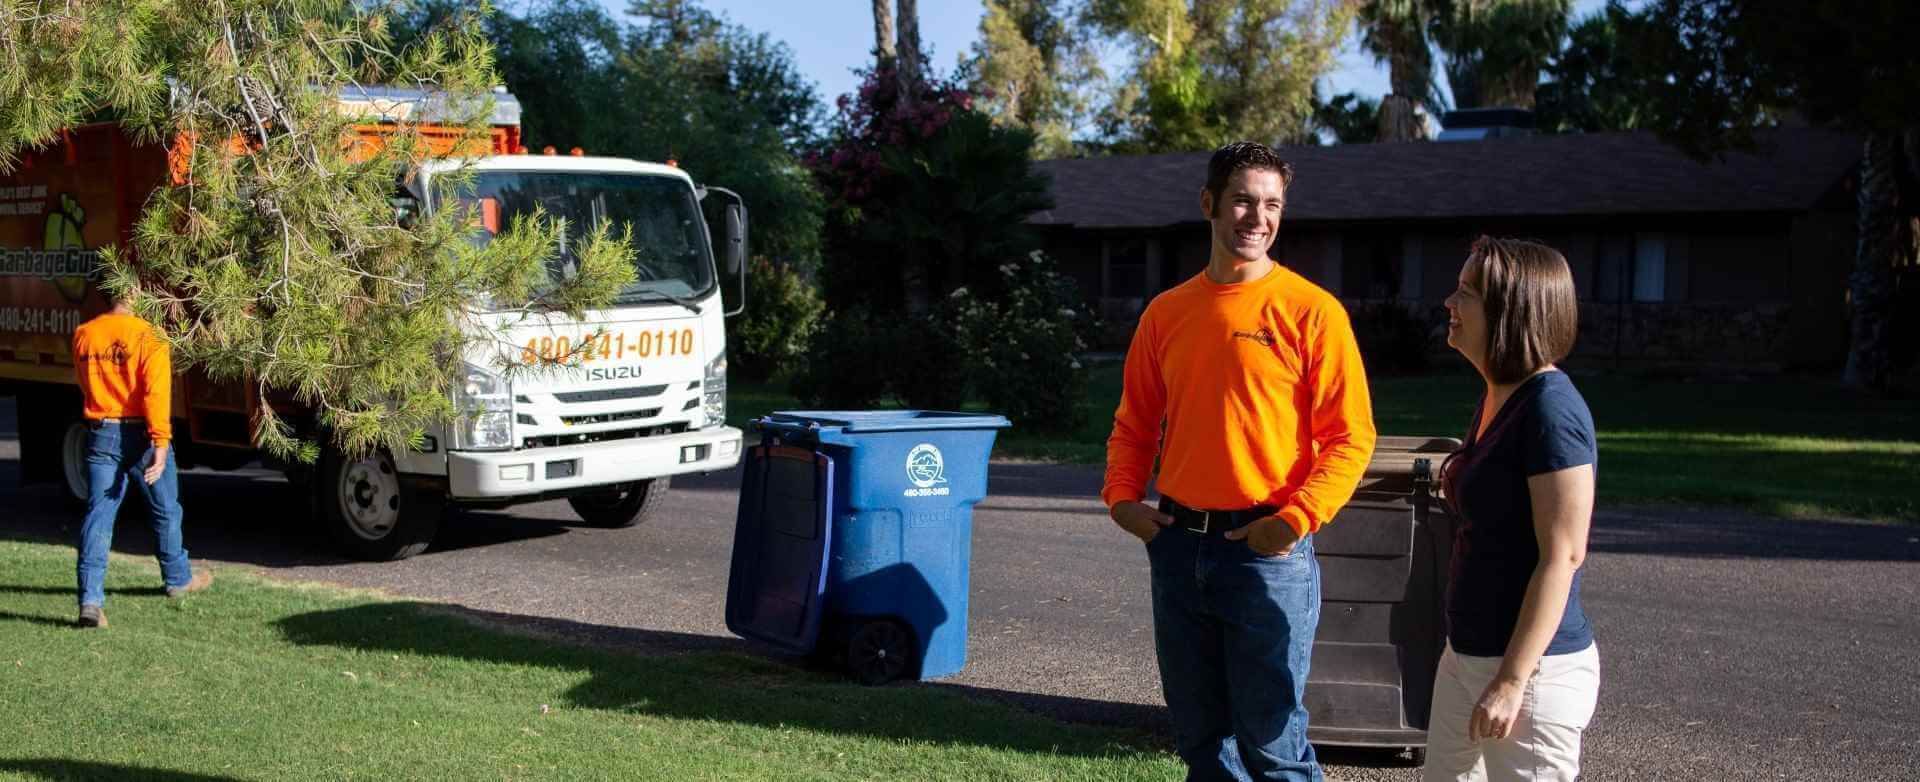 #1 for Junk Removal in Phoenix, AZ with Over 1200 5-Star Reviews!